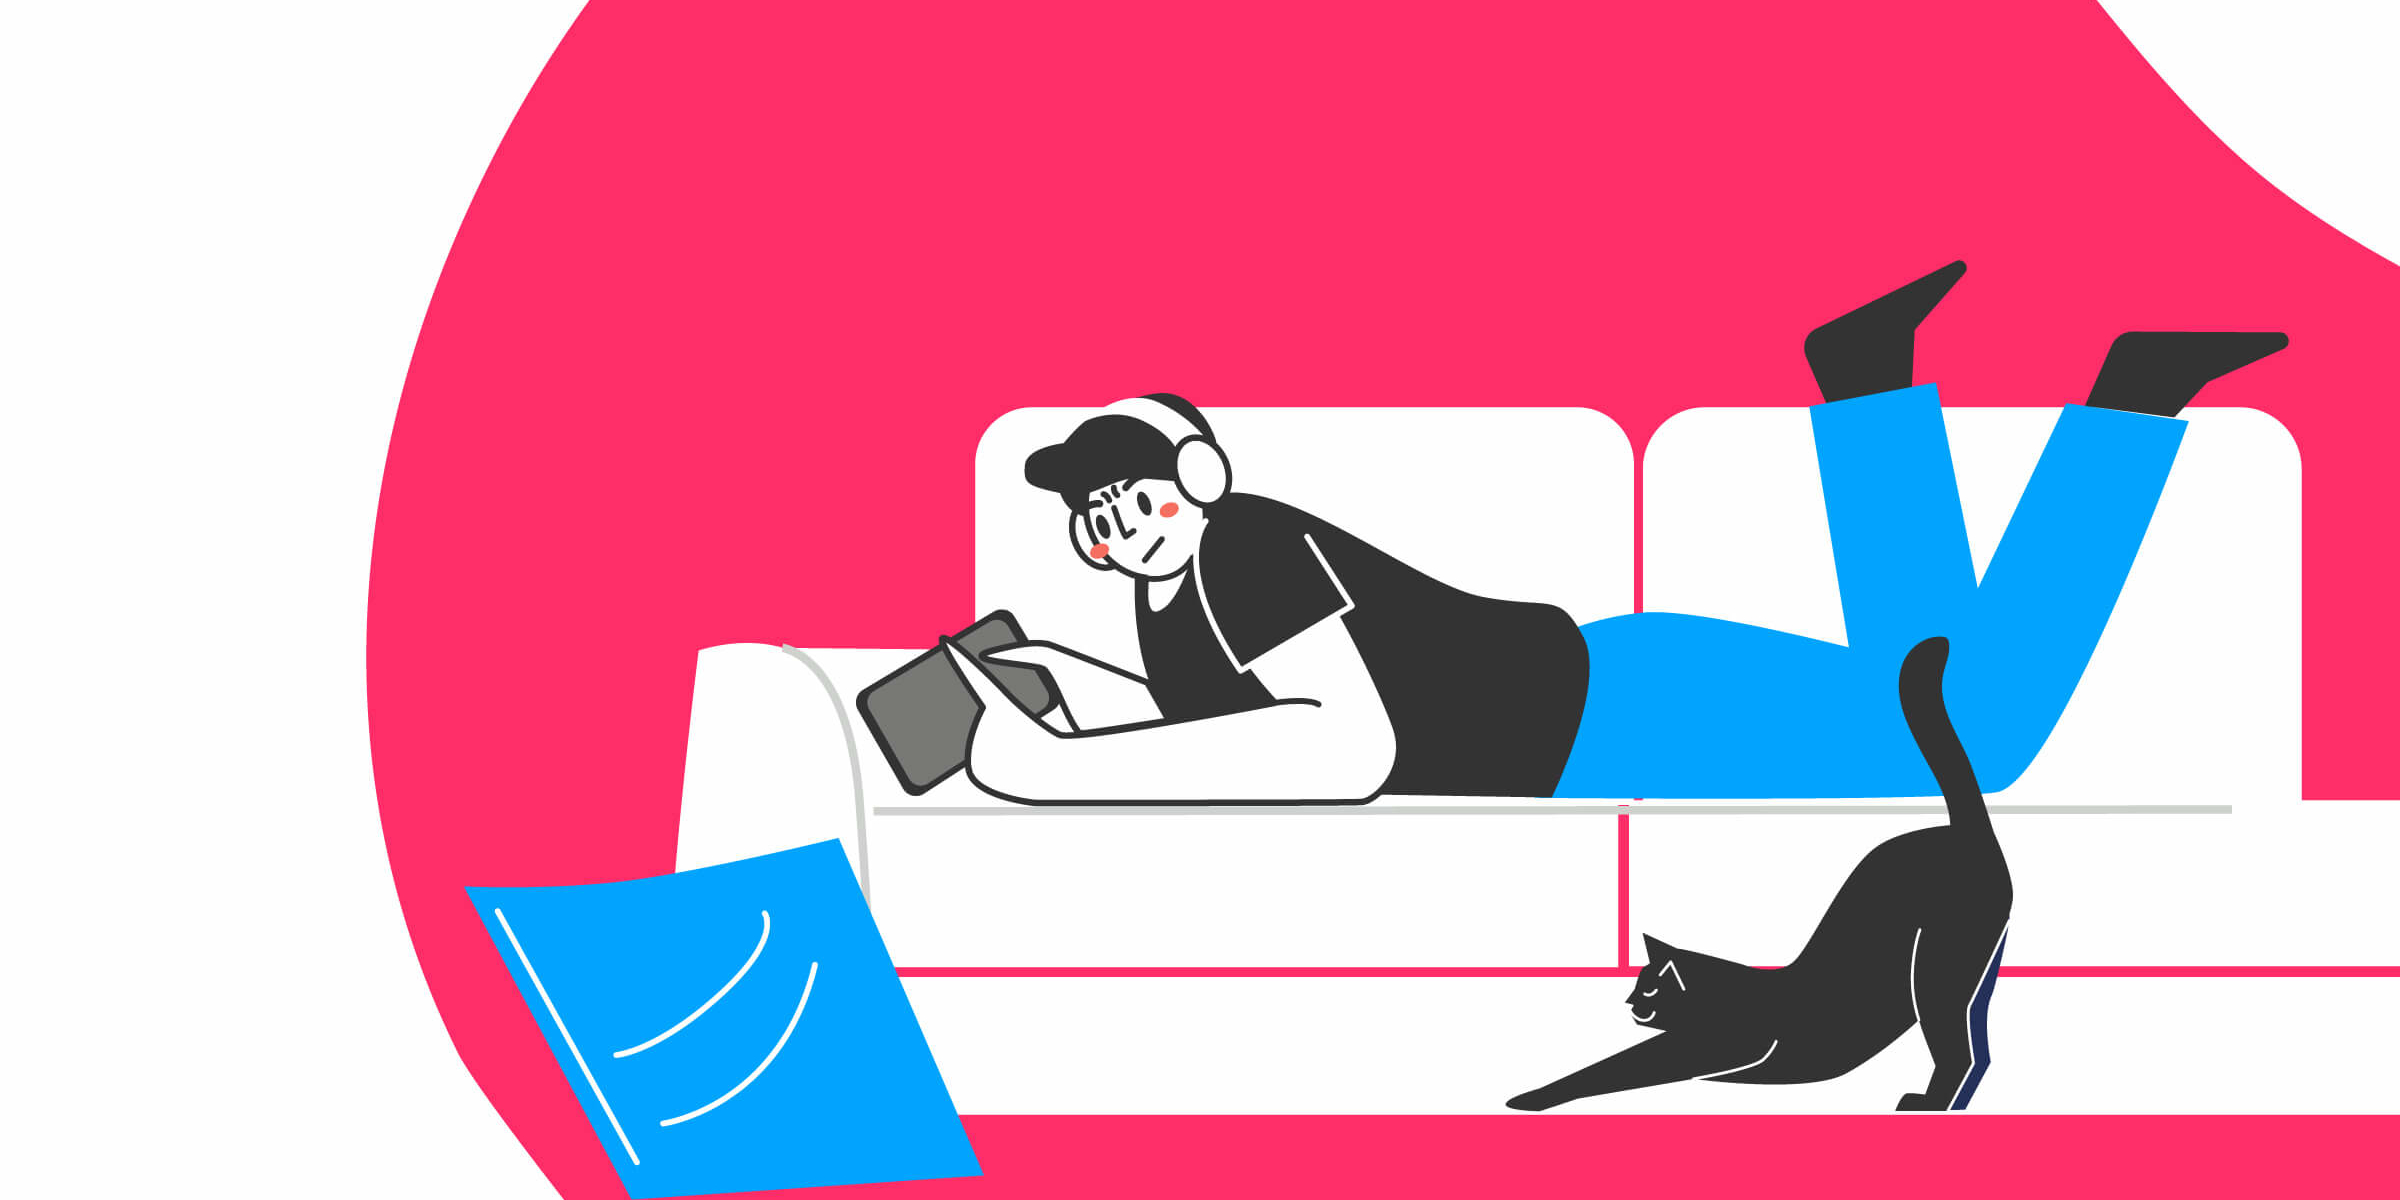 Illustration man on sofa listening to a B2B podcast with headphones